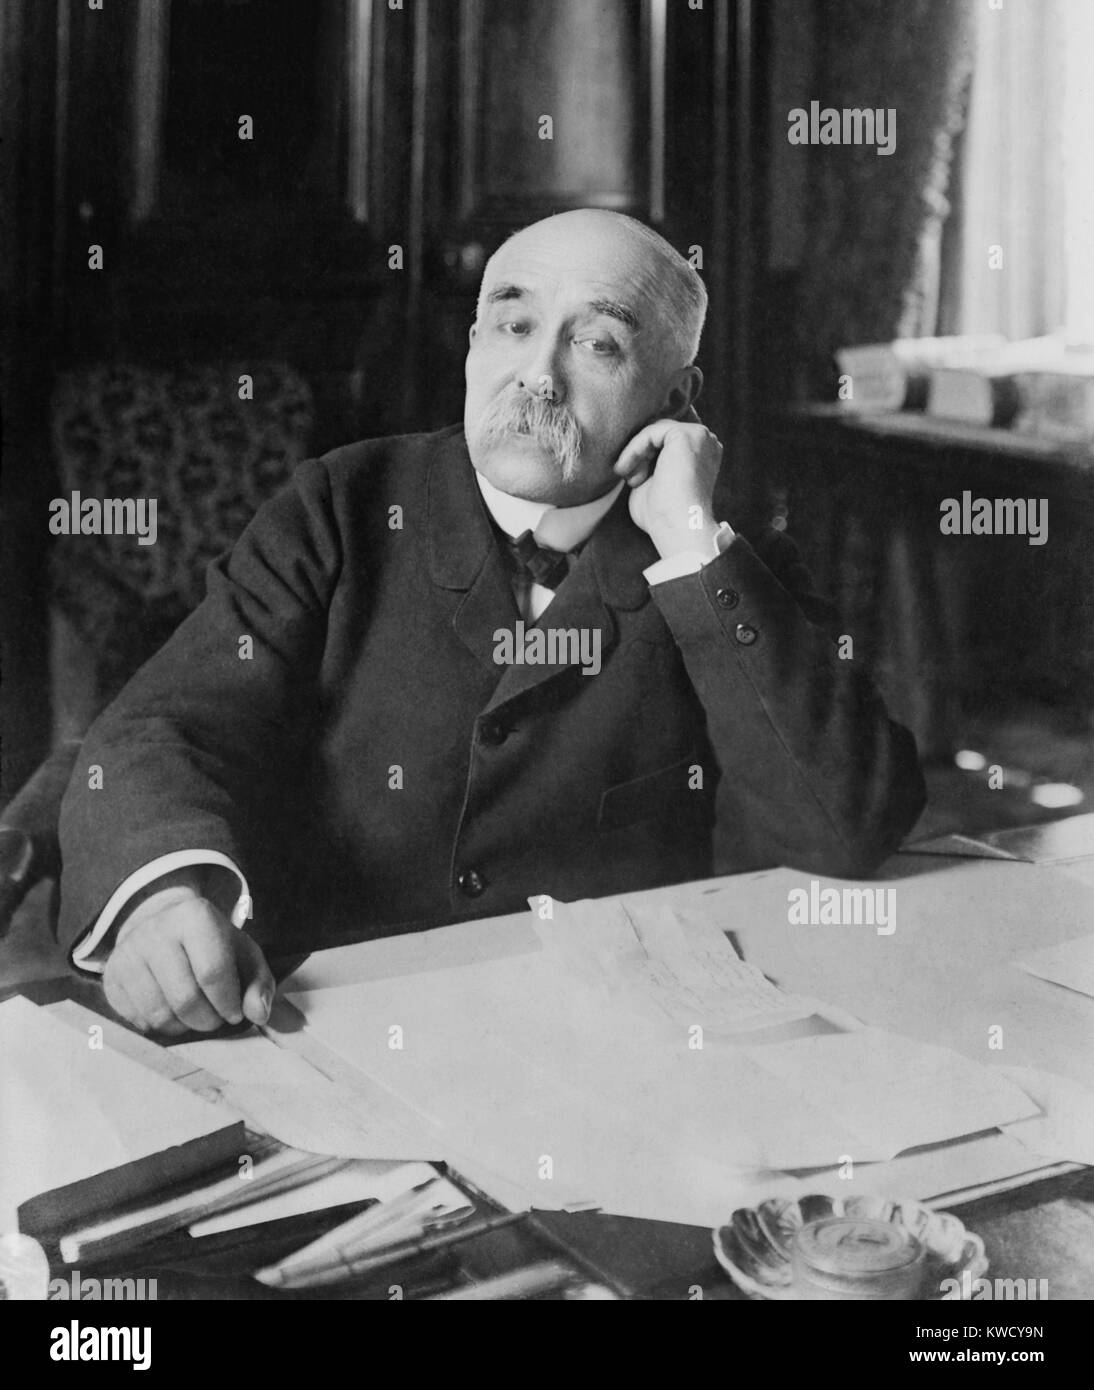 Georges Clemenceau was Prime Minister of France from Oct. 25. 1906 – July 24, 1909. In a second term, from 1917 to 1920, he influenced the Paris Peace Conference of 1919 to impose harsh conditions on Germany (BSLOC_2017_1_73) Stock Photo